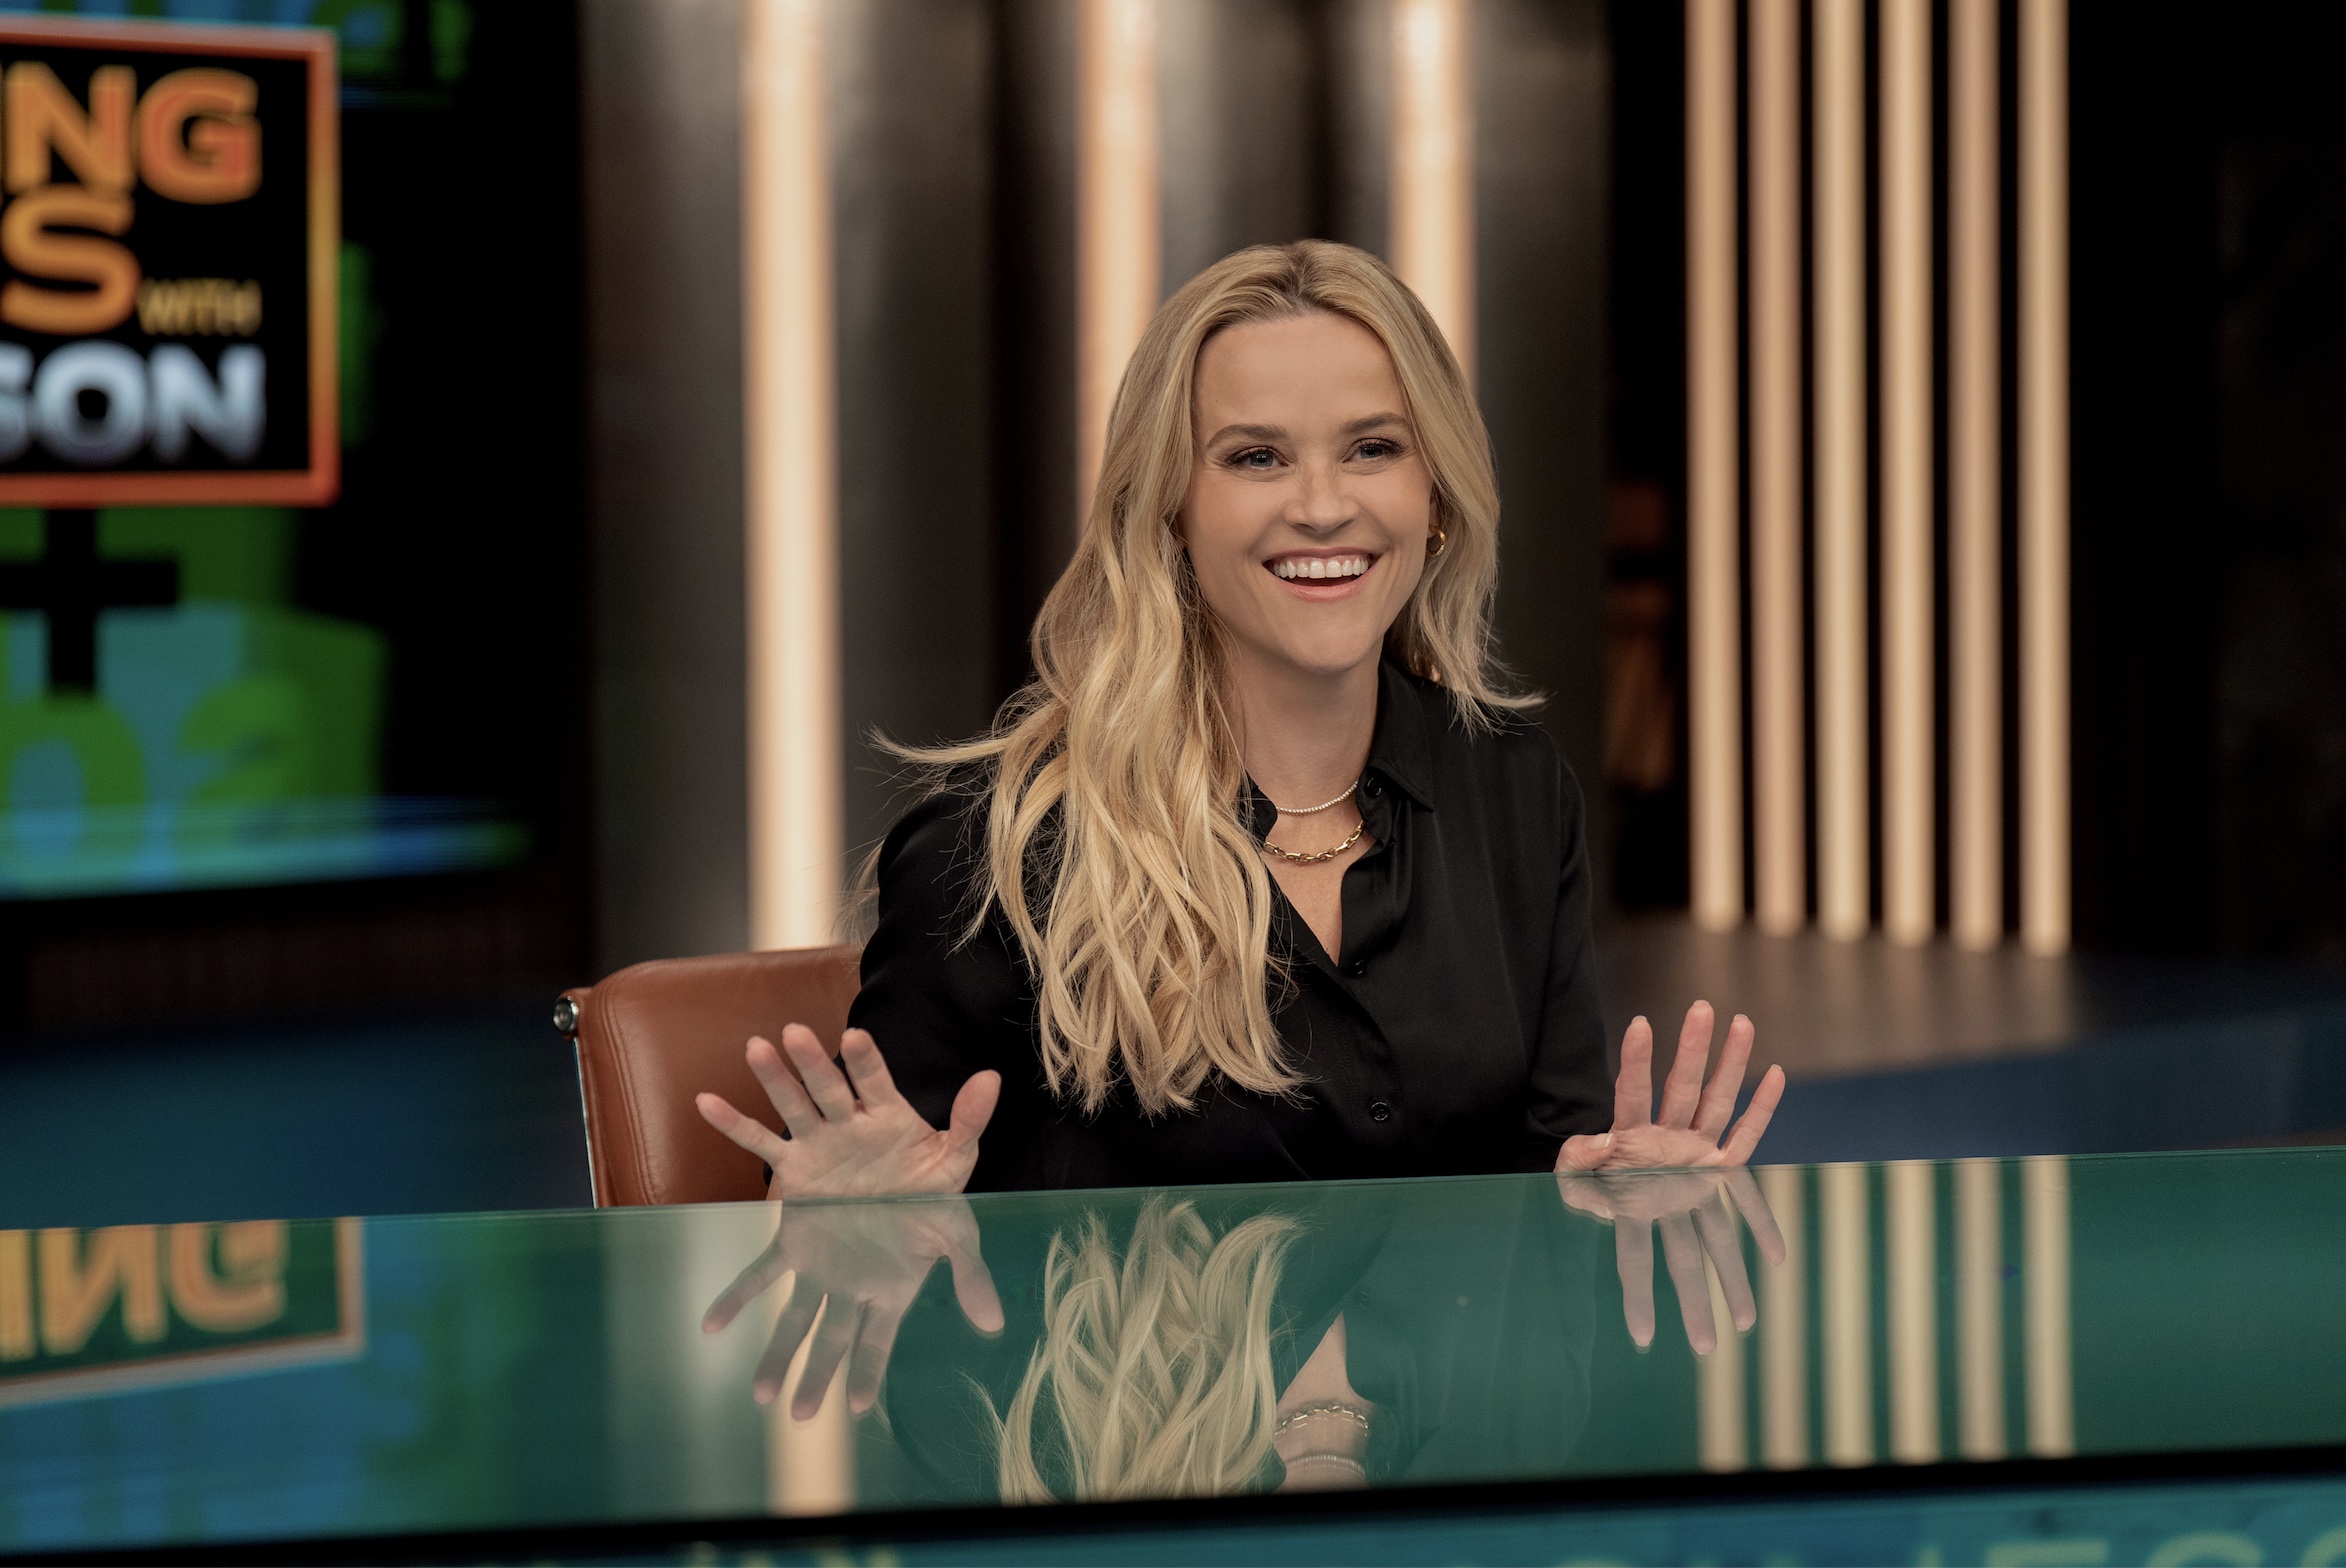 The Morning Show Cast on Apple TV+ - Reese Witherspoon as Bradley Jackson